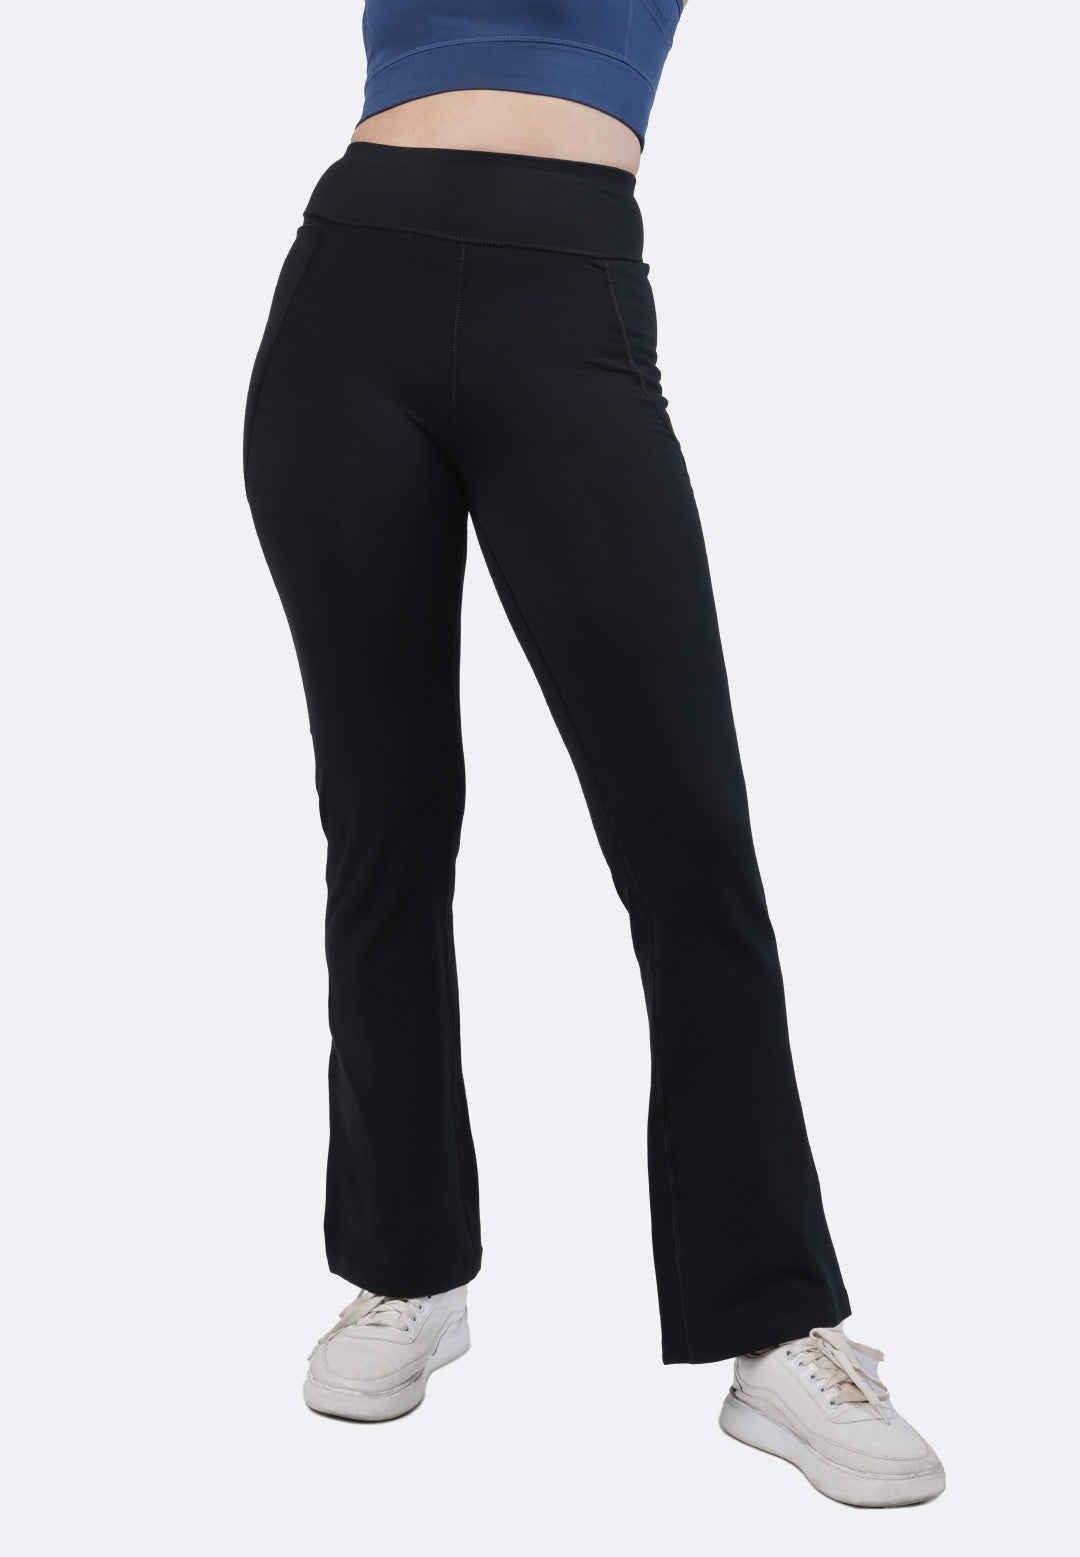 Everyday Yoga Girls Uphold Tribe High Waisted Leggings With Pockets 24.5